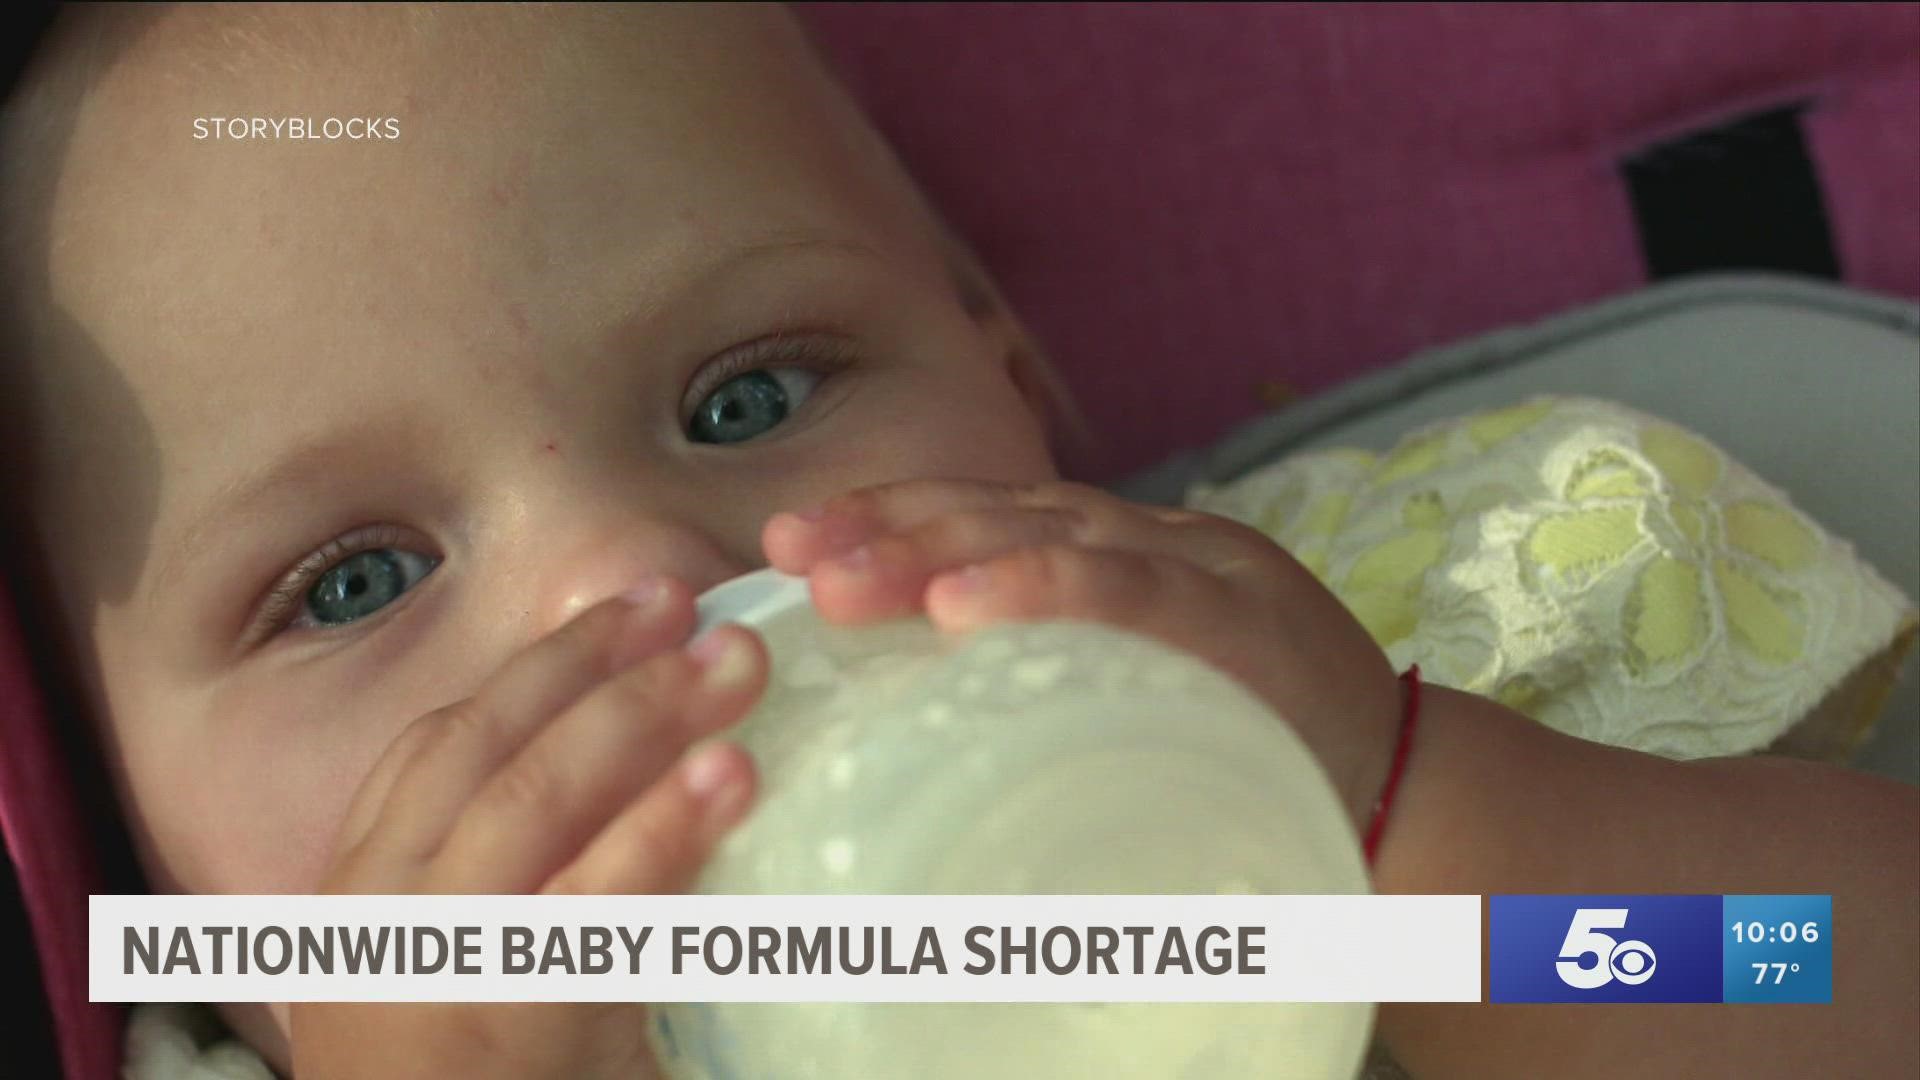 Officials with the Arkansas Department of Health addressed the nationwide formula shortage.